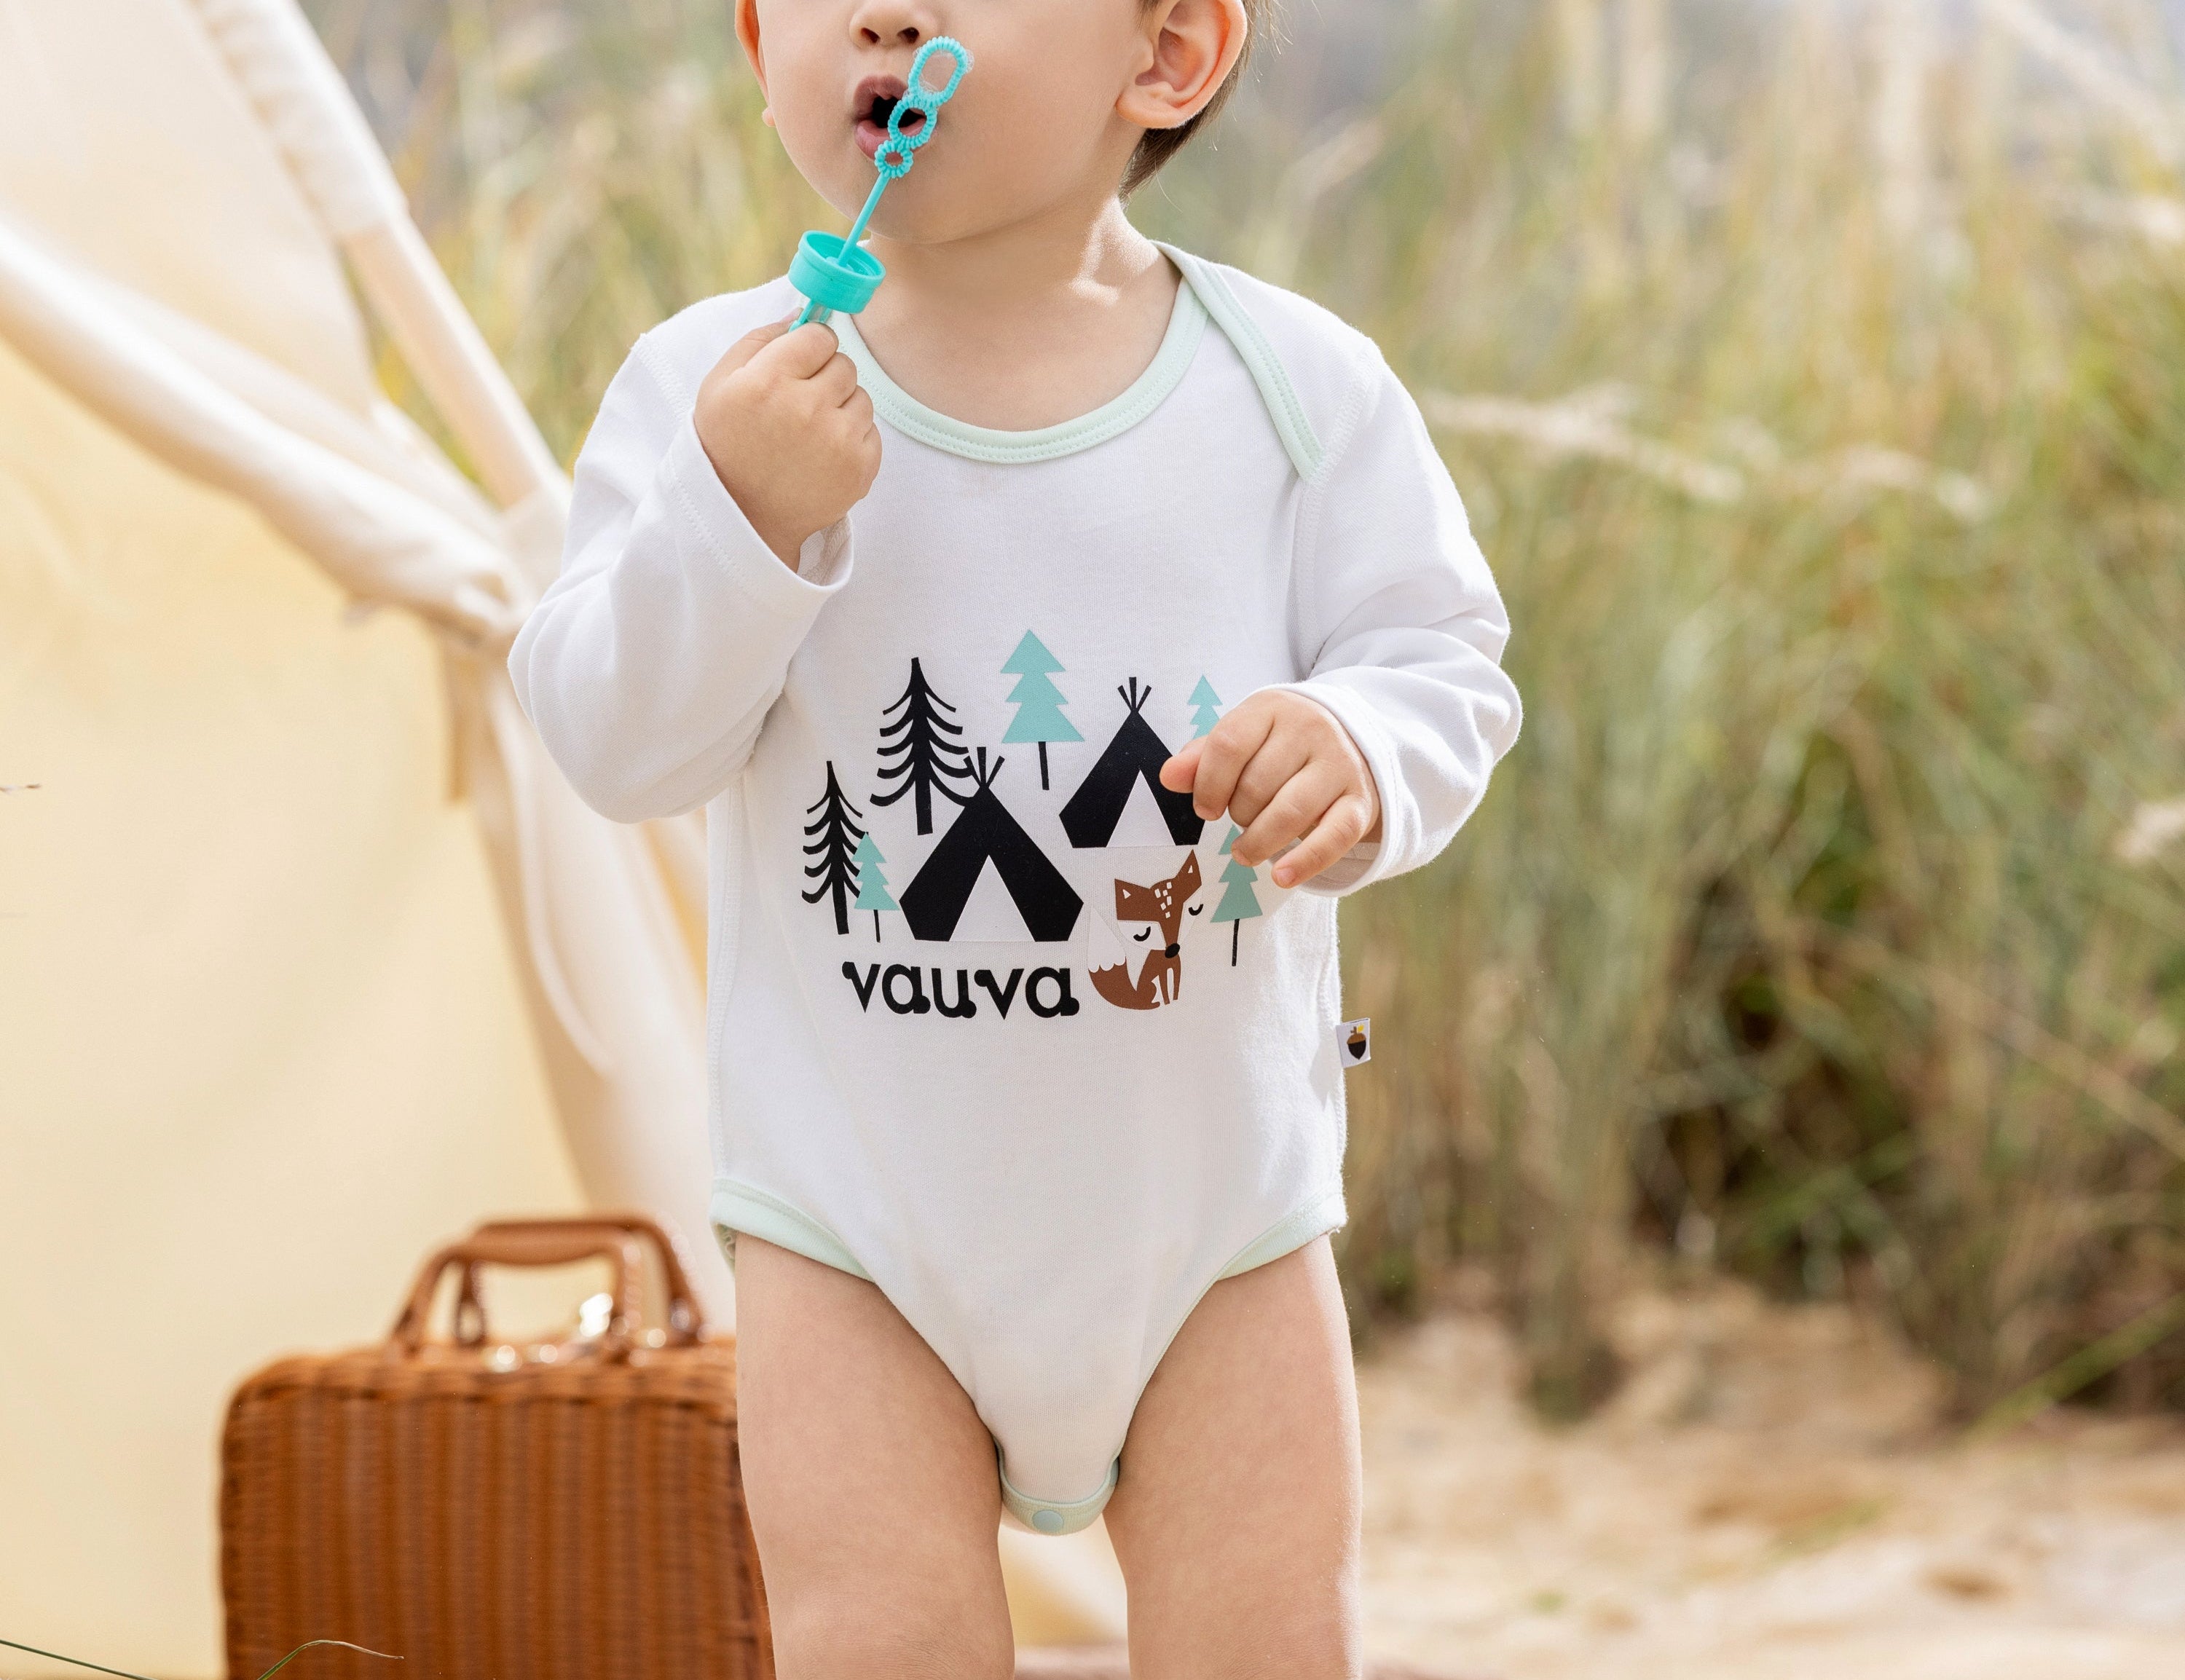 Vauva BBNS - Baby Anti-bacterial Organic Cotton Bodysuits (2-pack Green/Print)-model image front